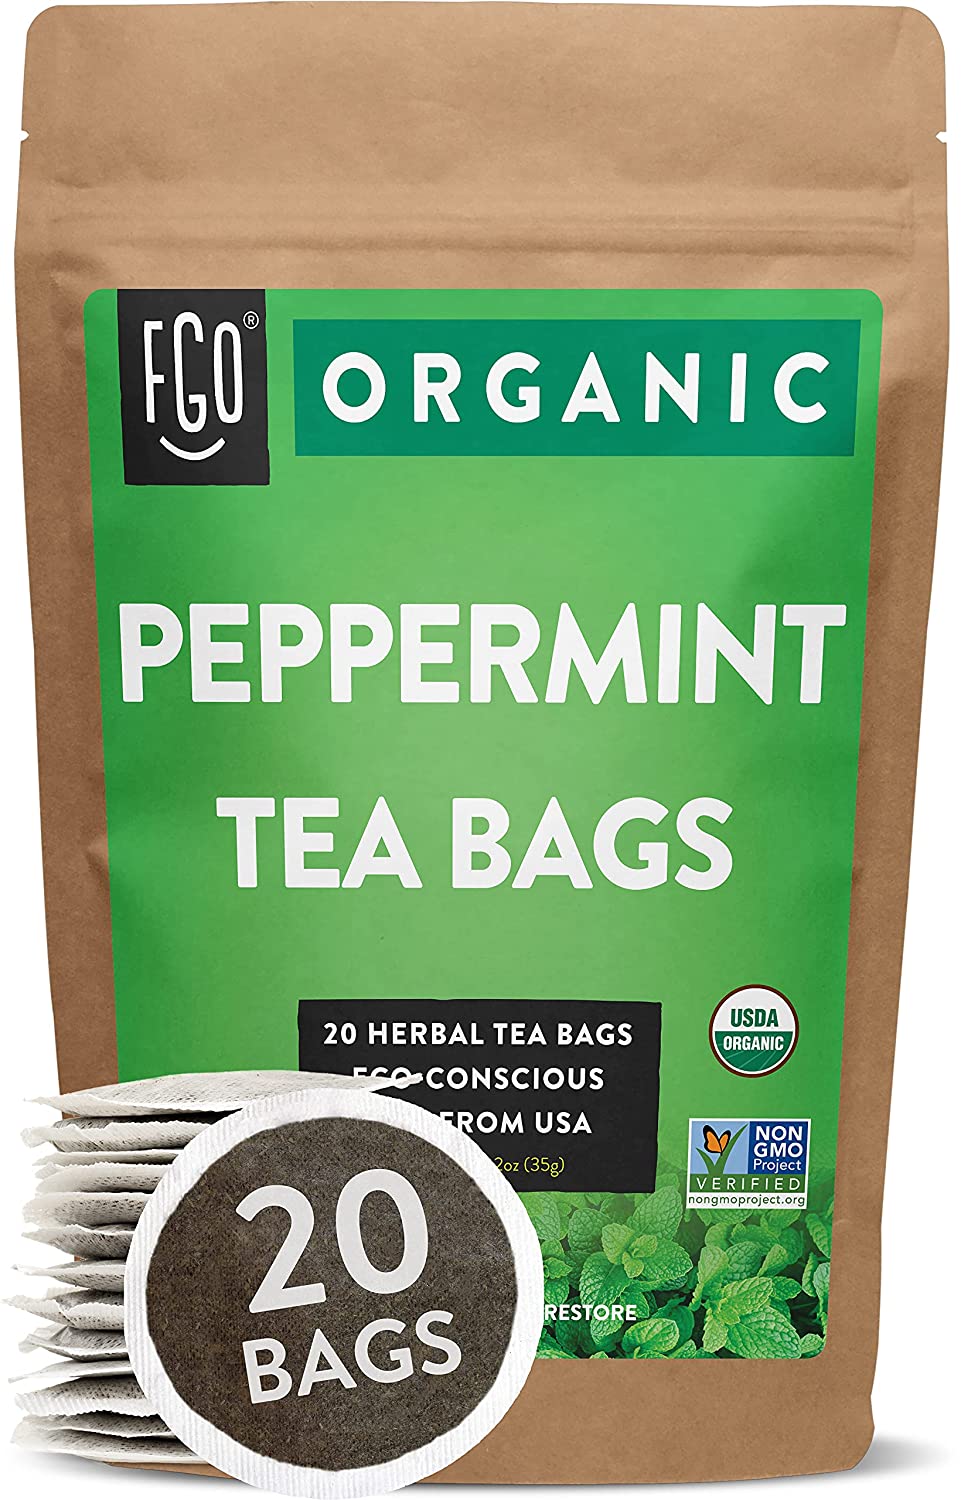 Style: Tea bags, Flavor Name: Peppermint Leaf, Size: 100 Count (Pack of 1)